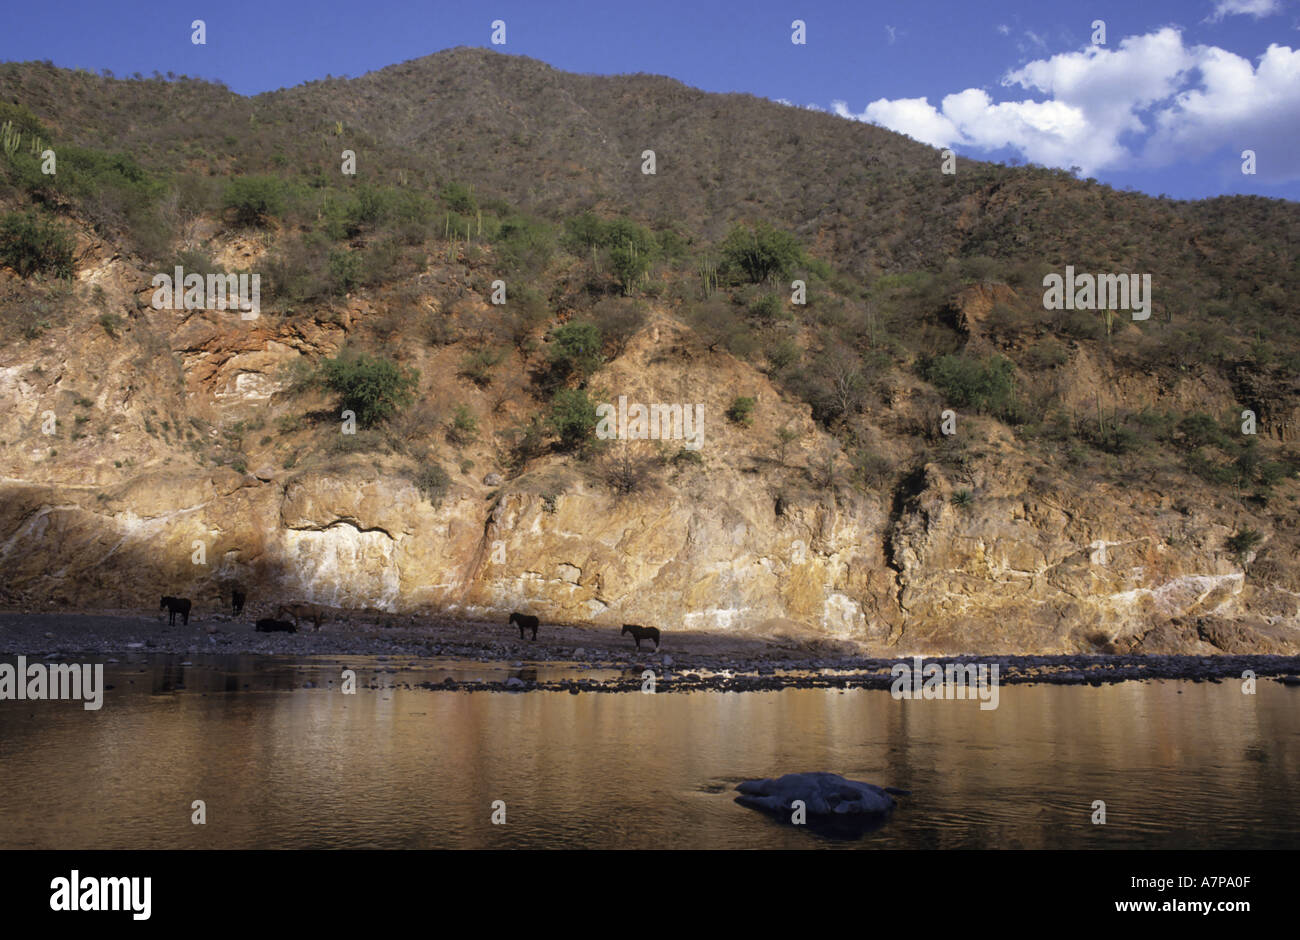 Mexico Chihuahua State Batopilas In The Copper Canyon Horses Resting Near A River At Sunset Stock Photo